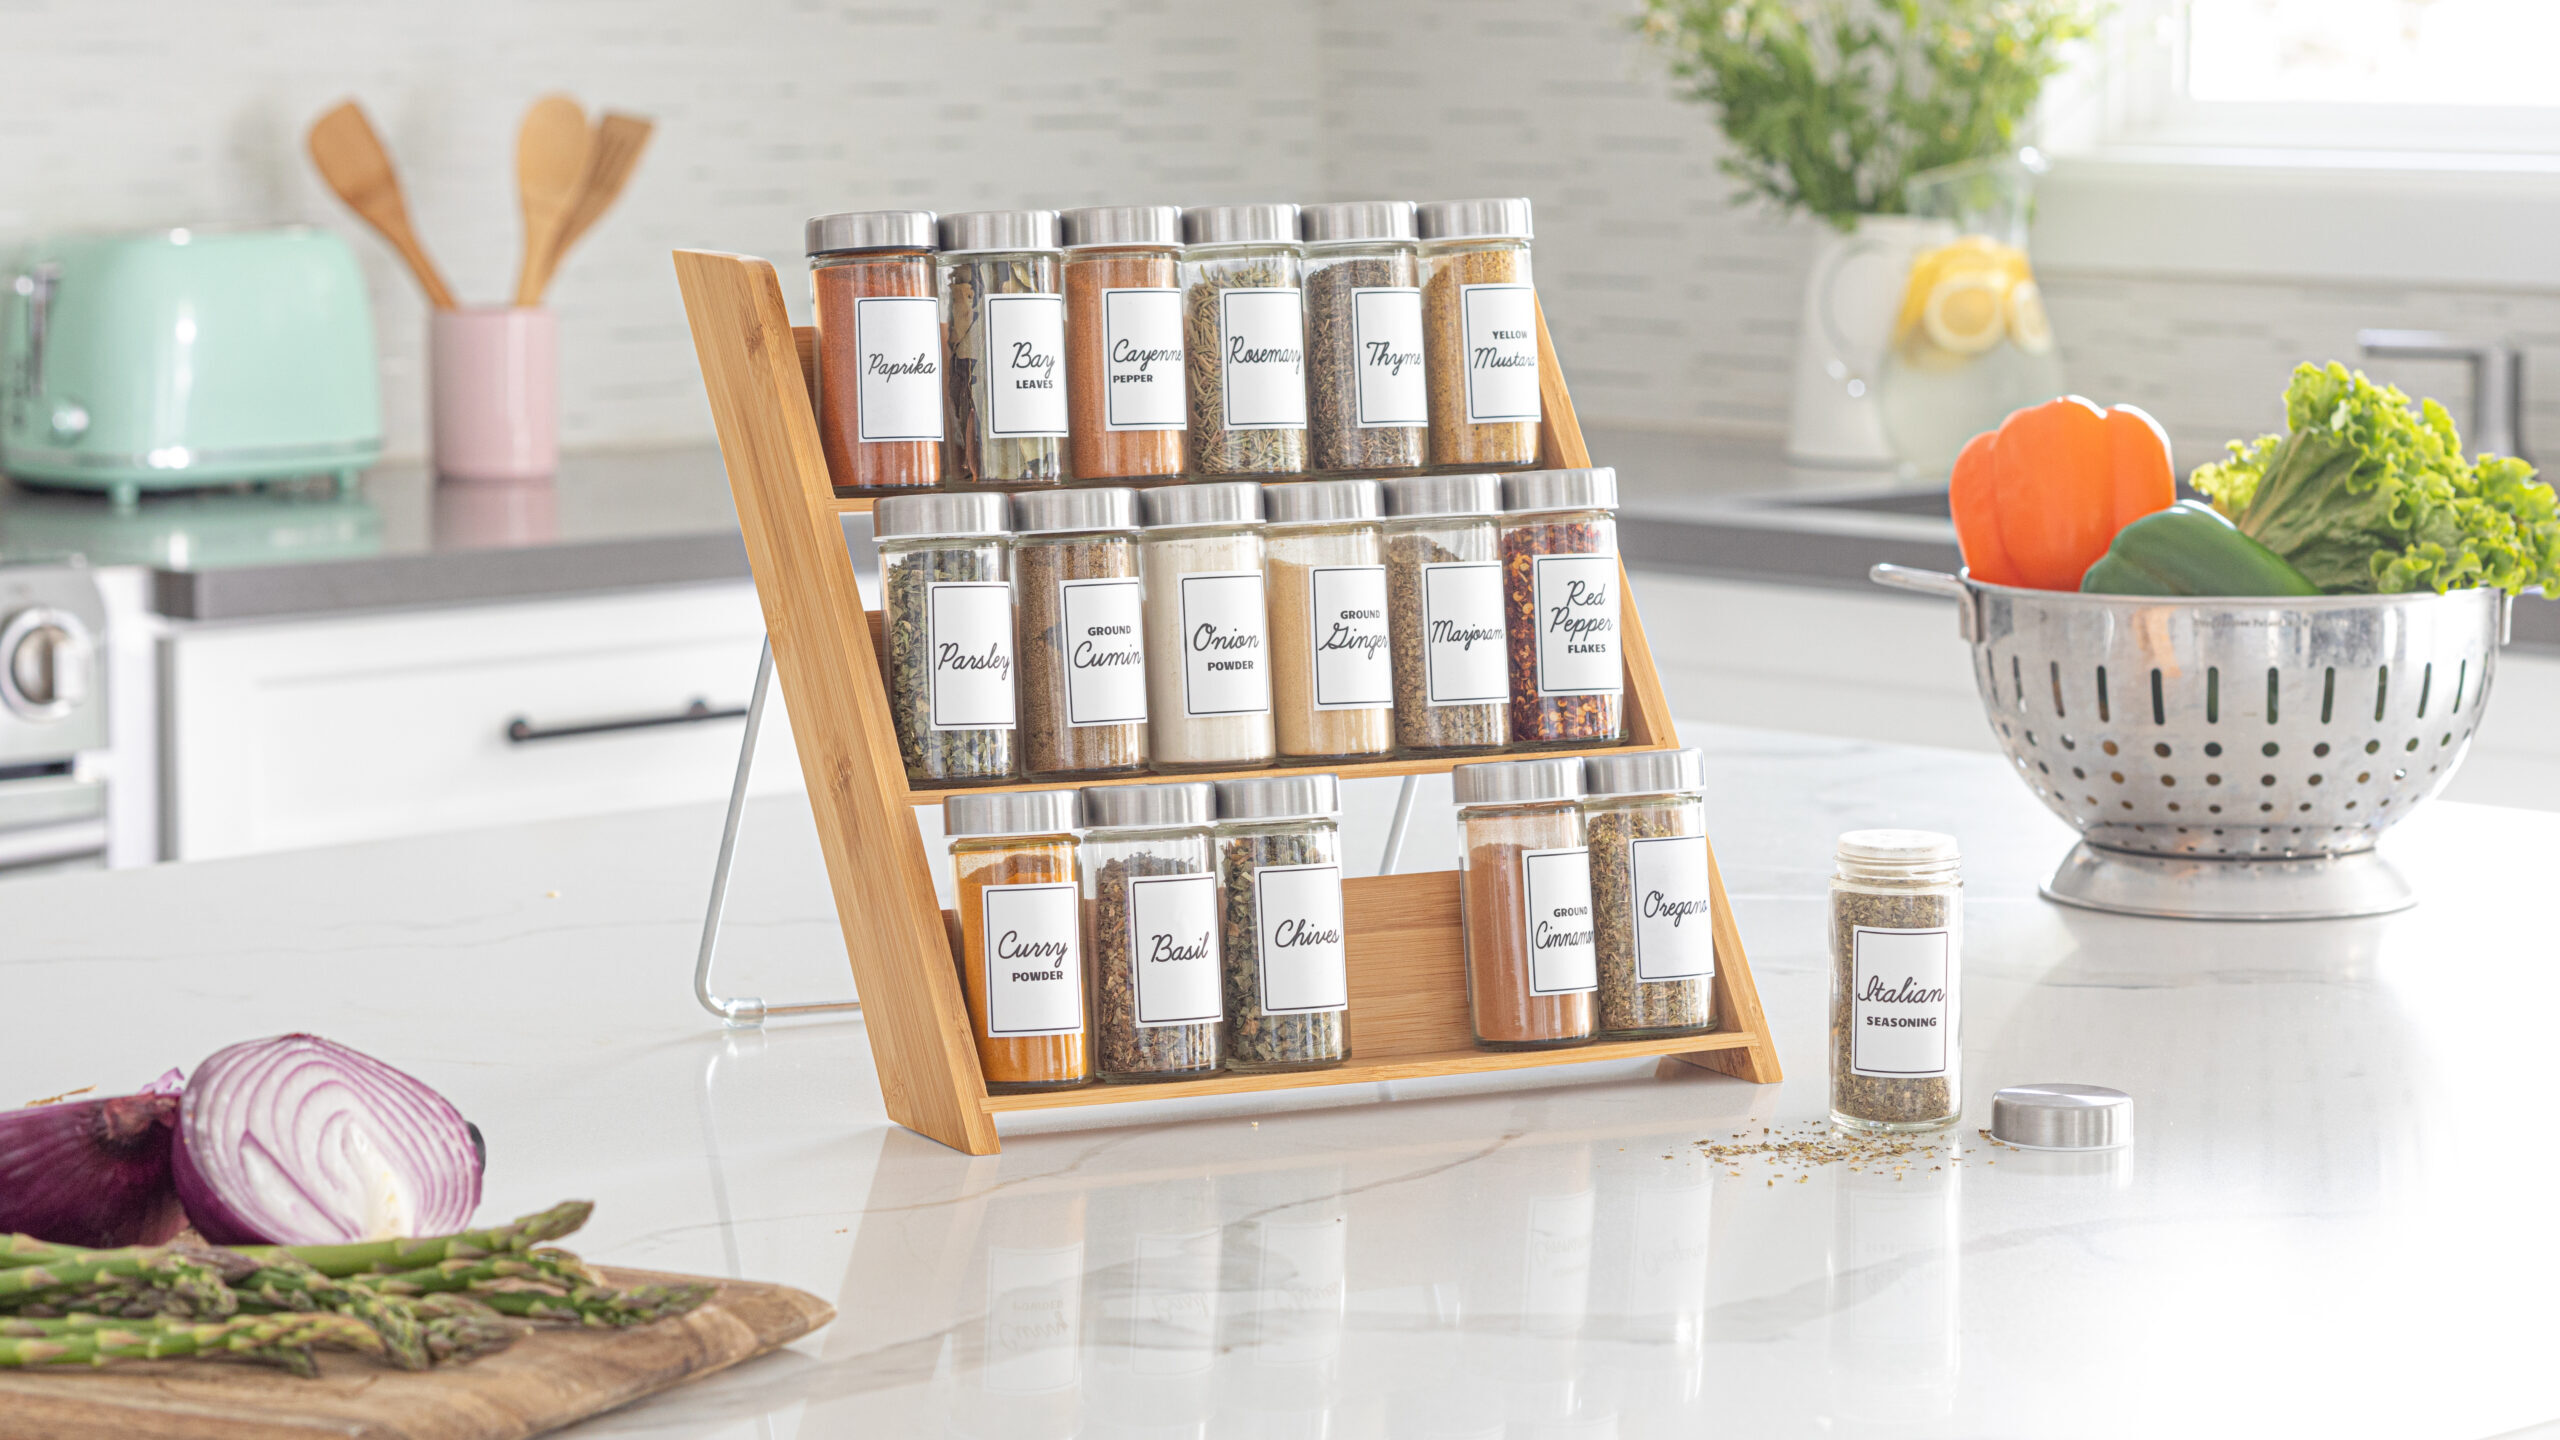 Spice rack on kitchen counter